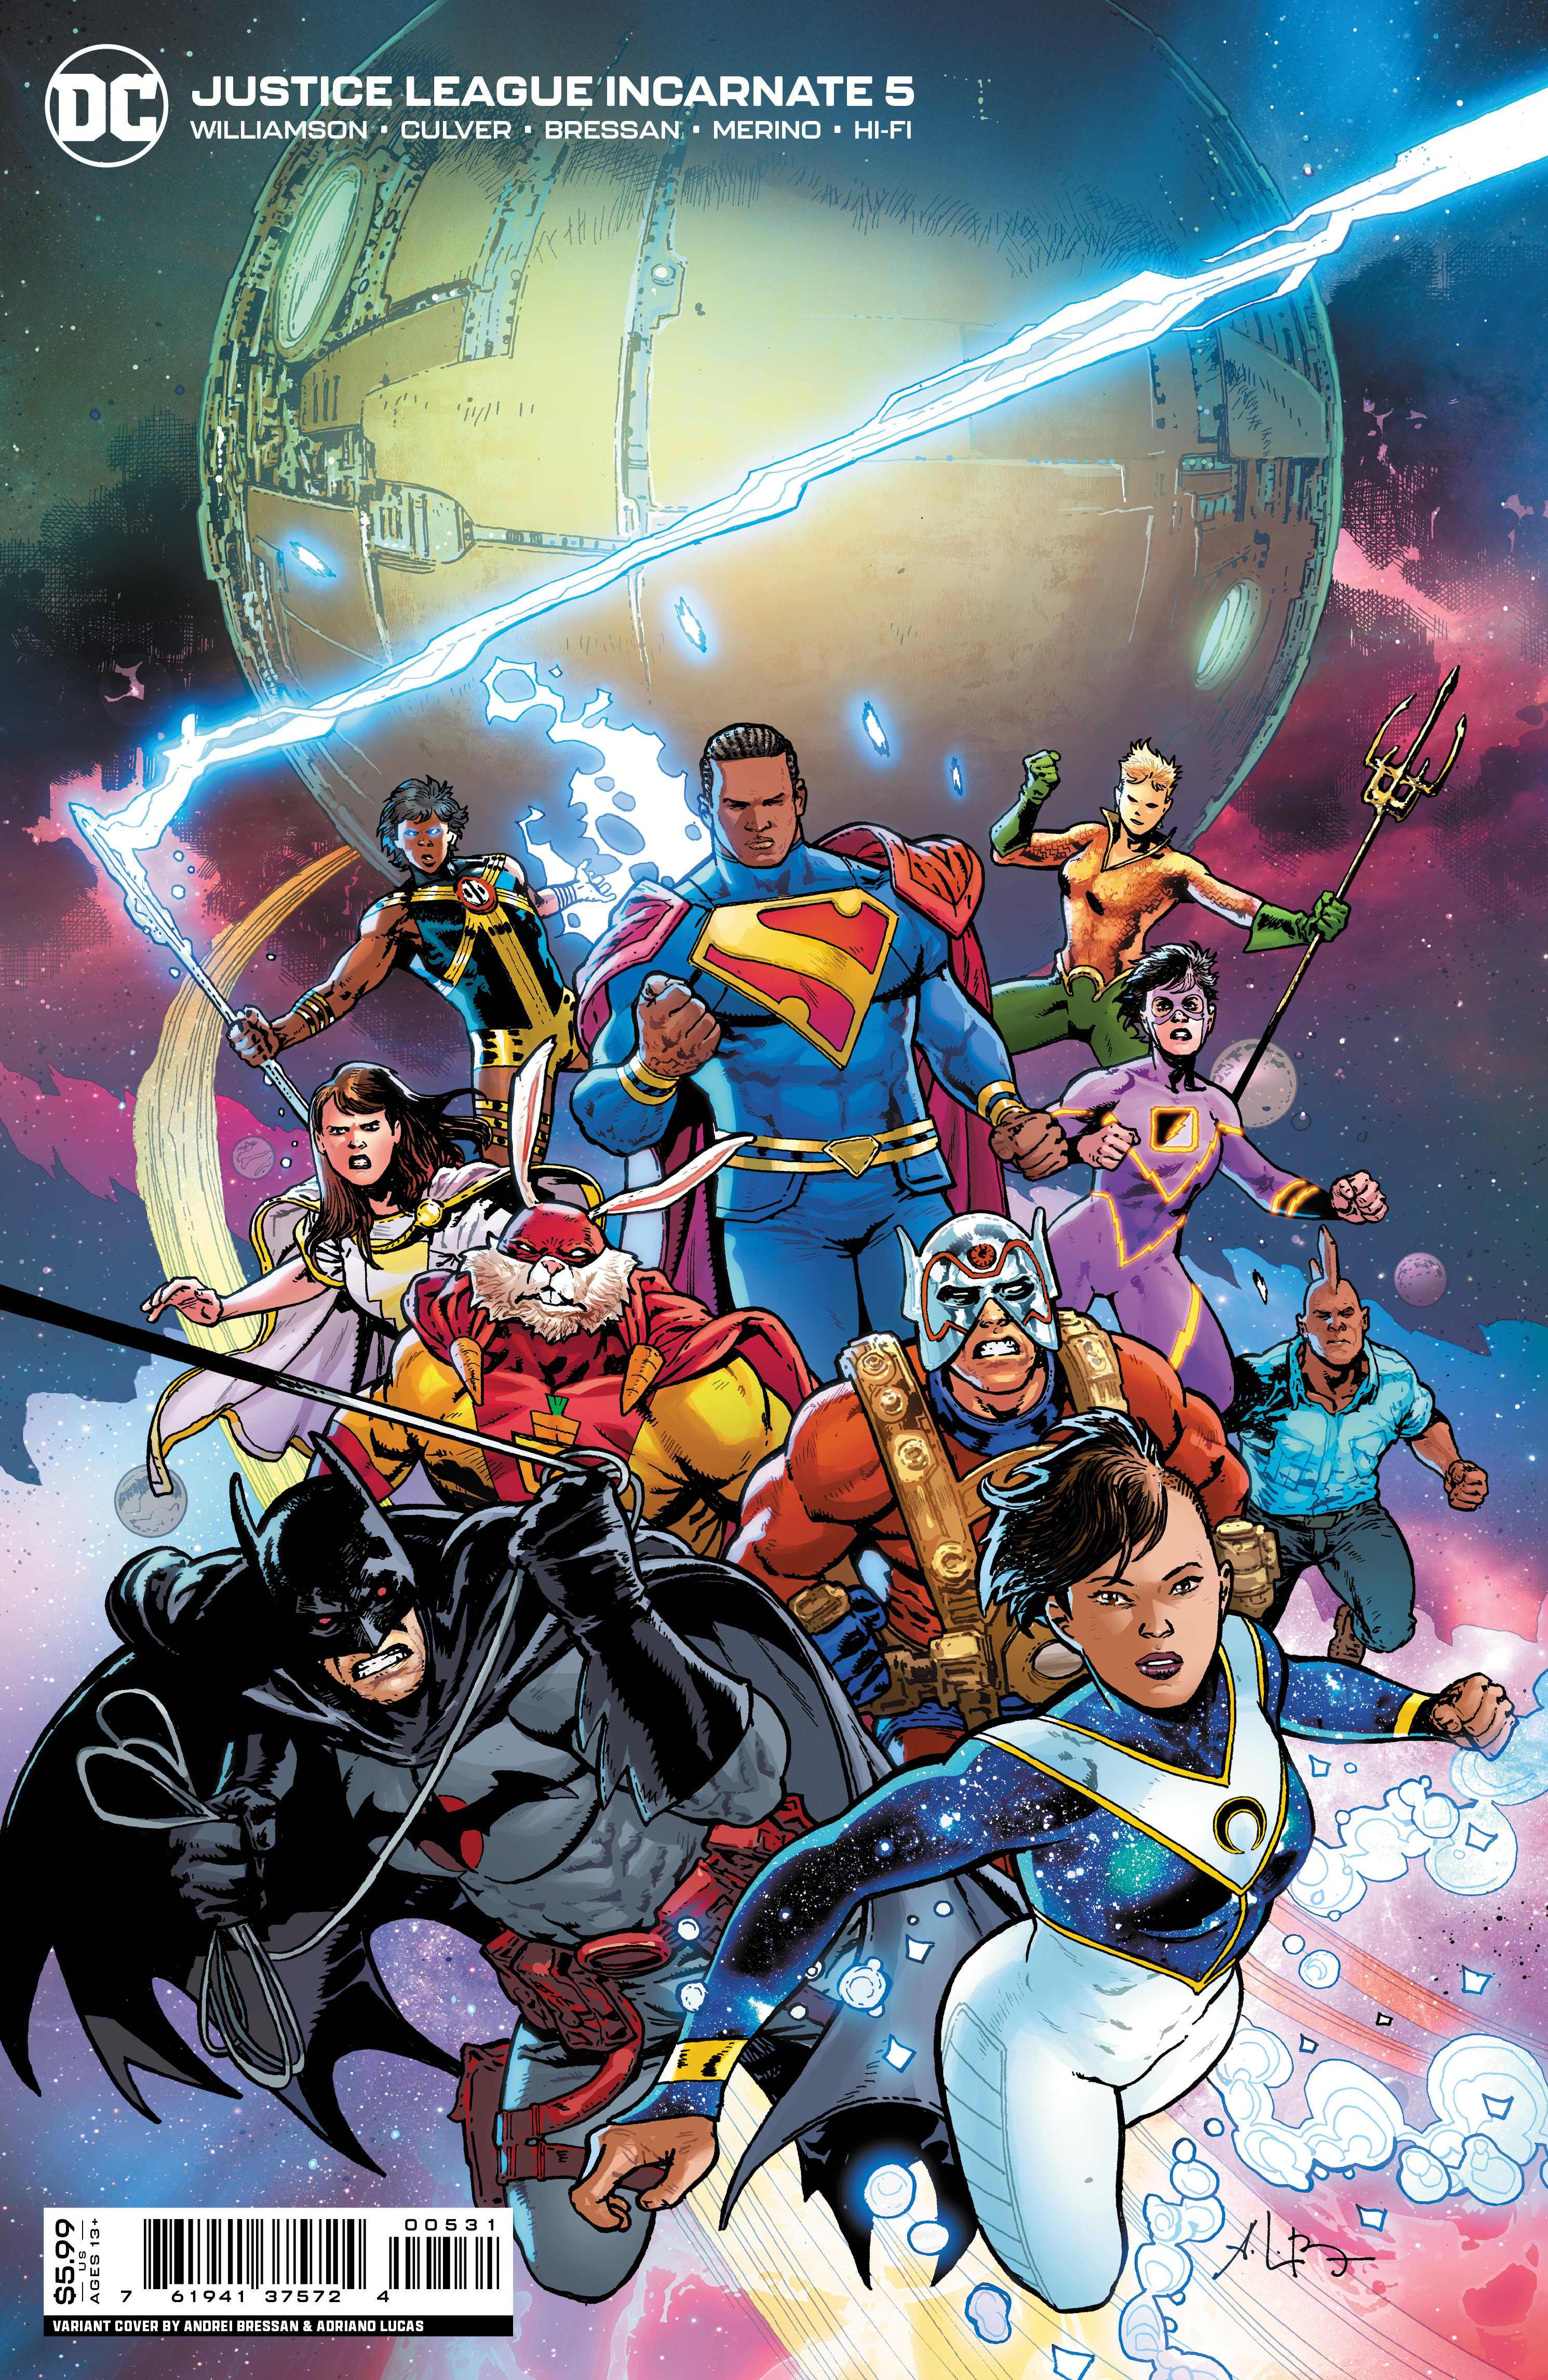 Justice League Incarnate #5 Cover C Incentive 1 for 25 Andrei Bressan Card Stock Variant (Of 5)